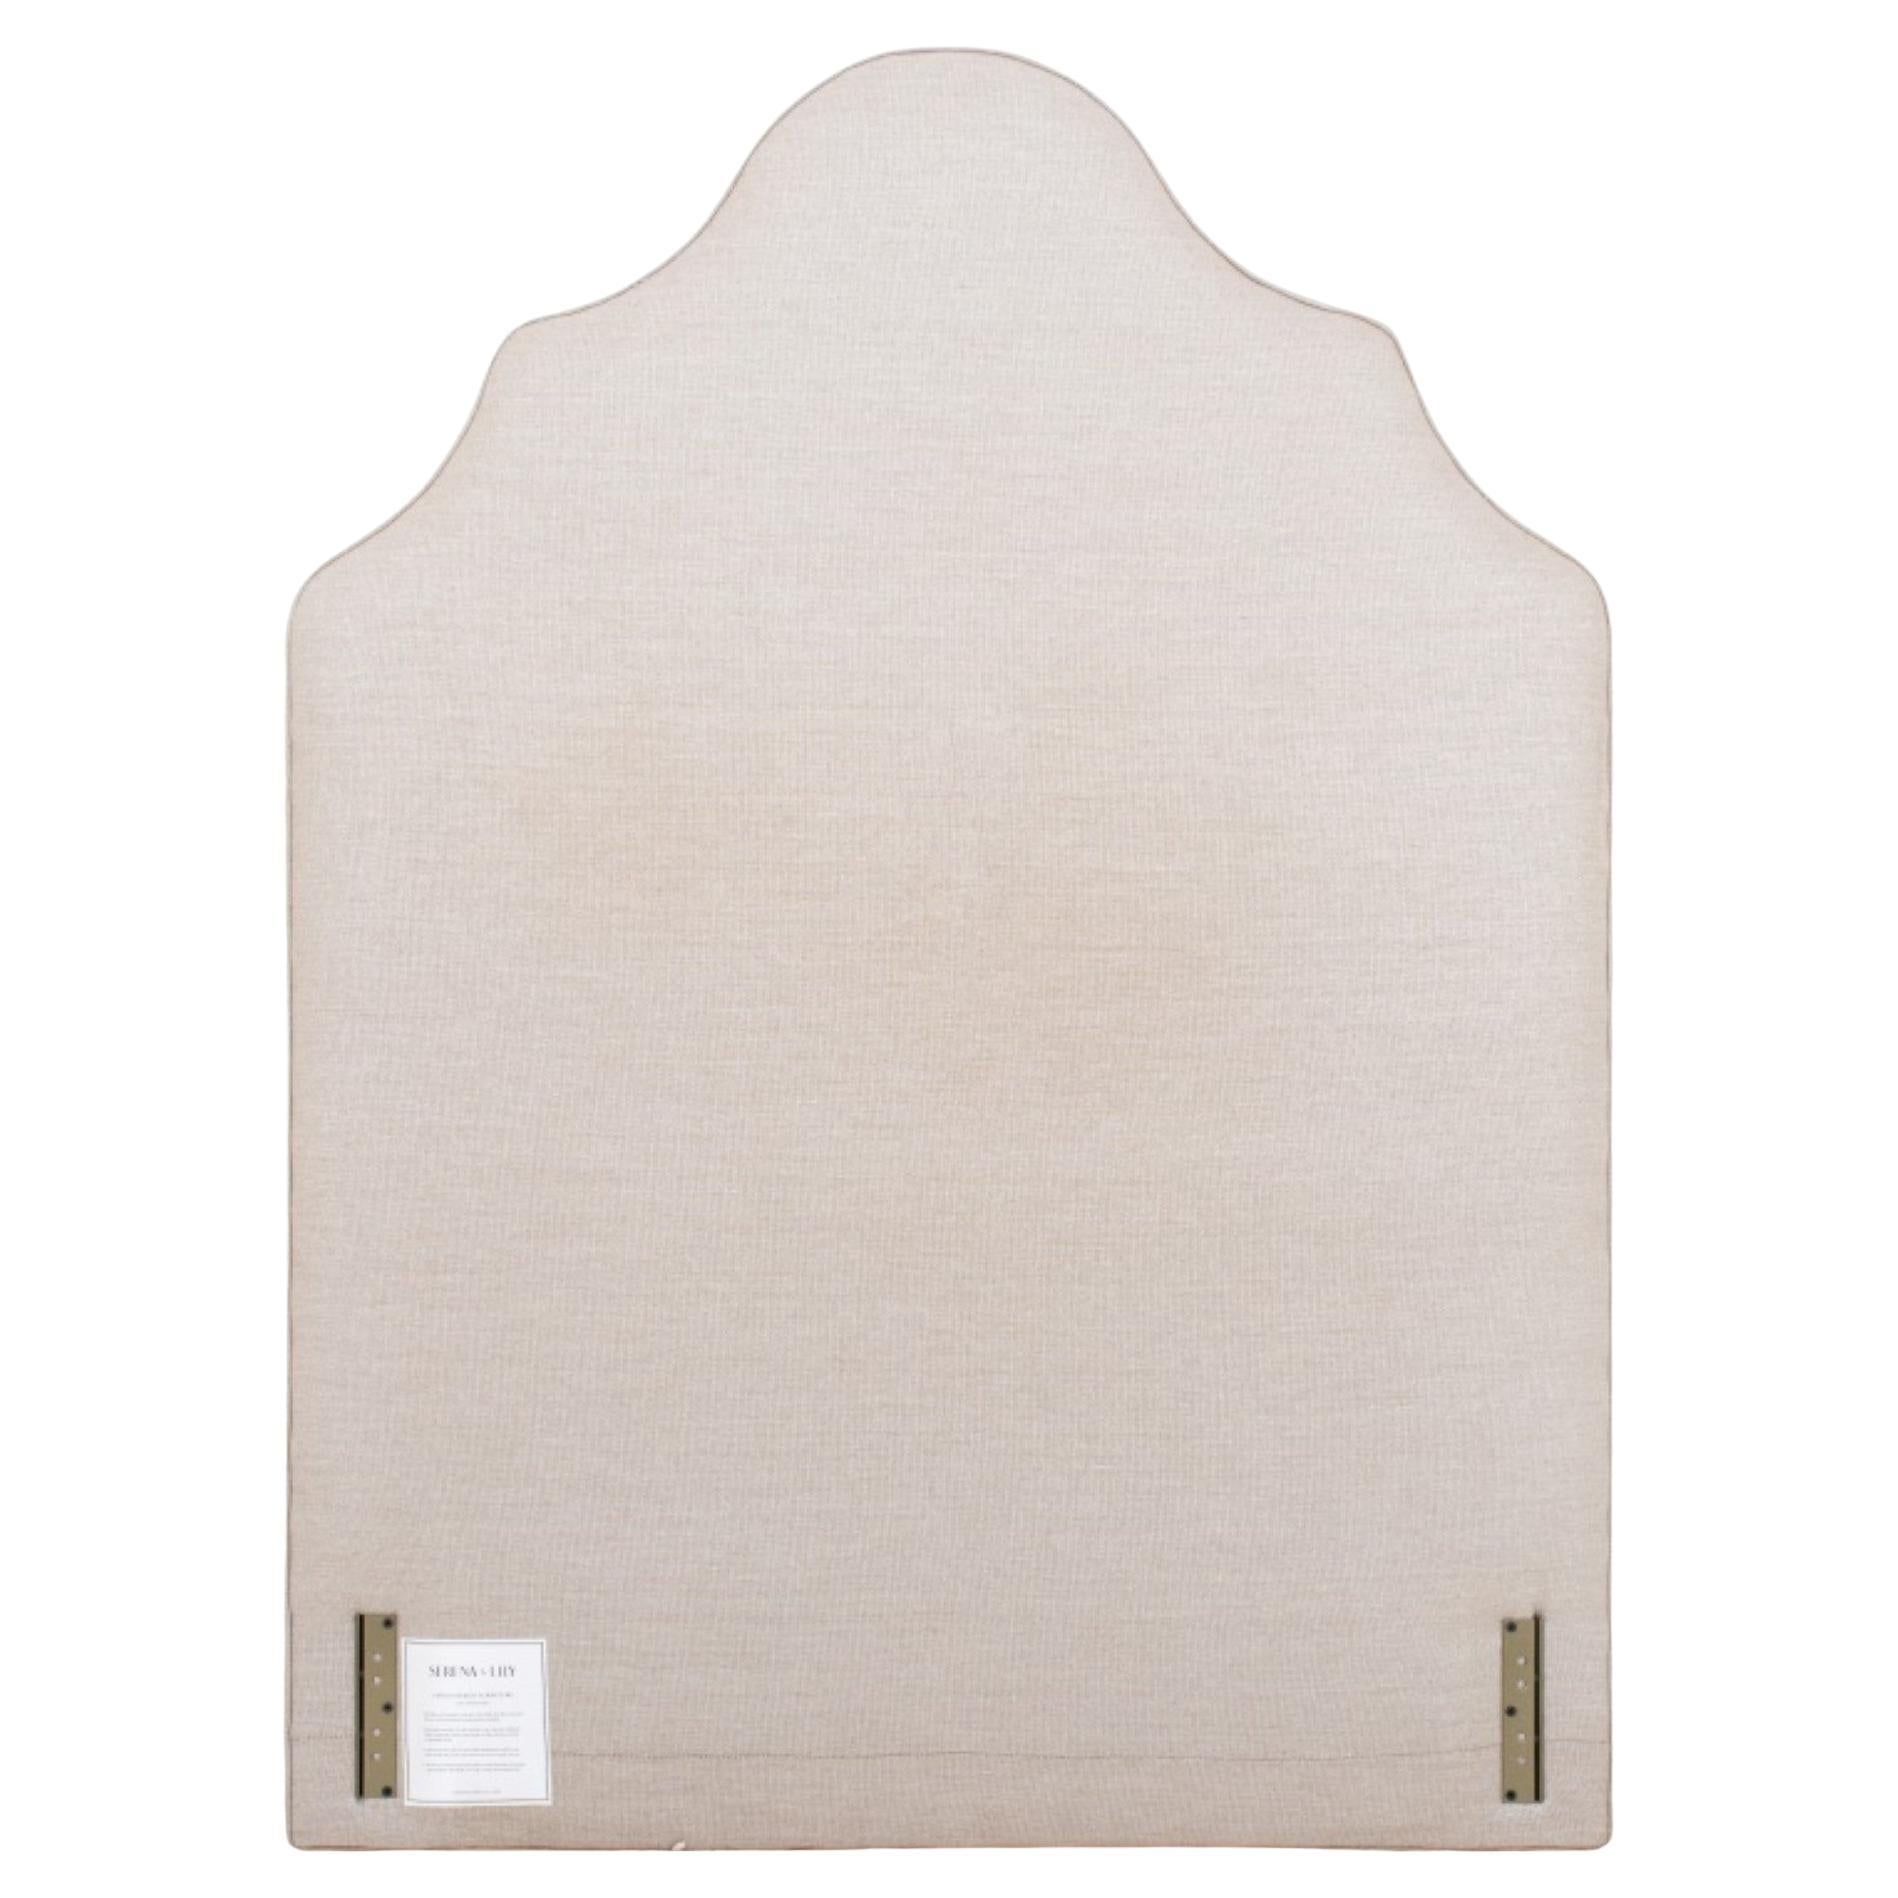 Serena & Lily Gray Upholstered Headboard and Frame For Sale